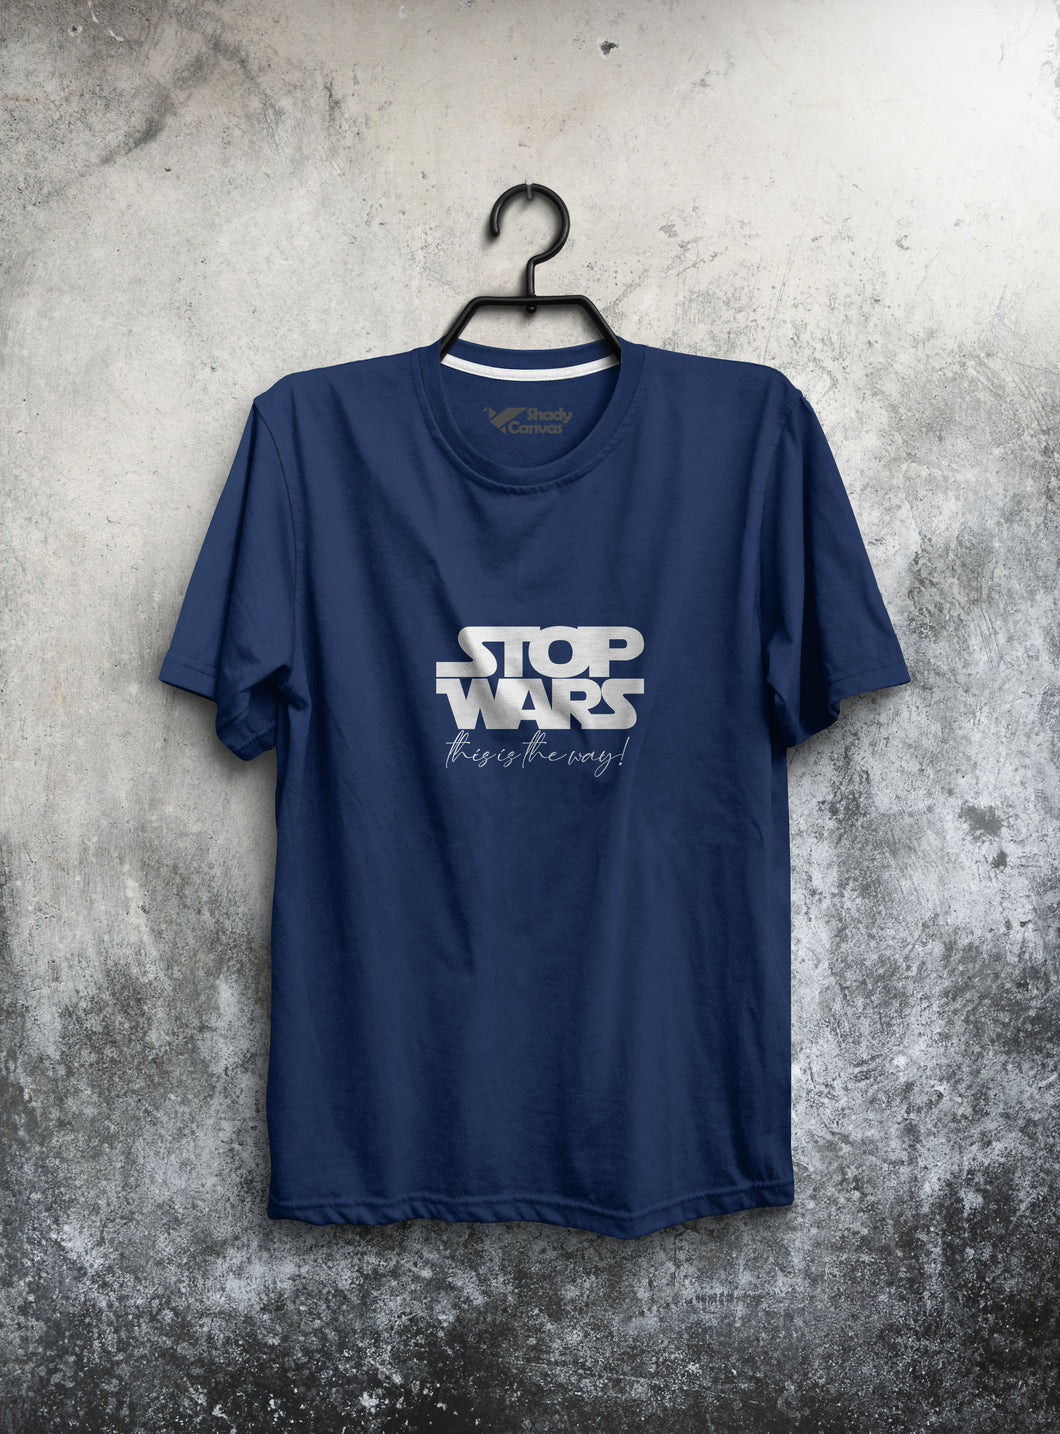 Stop Wars-this is the way!